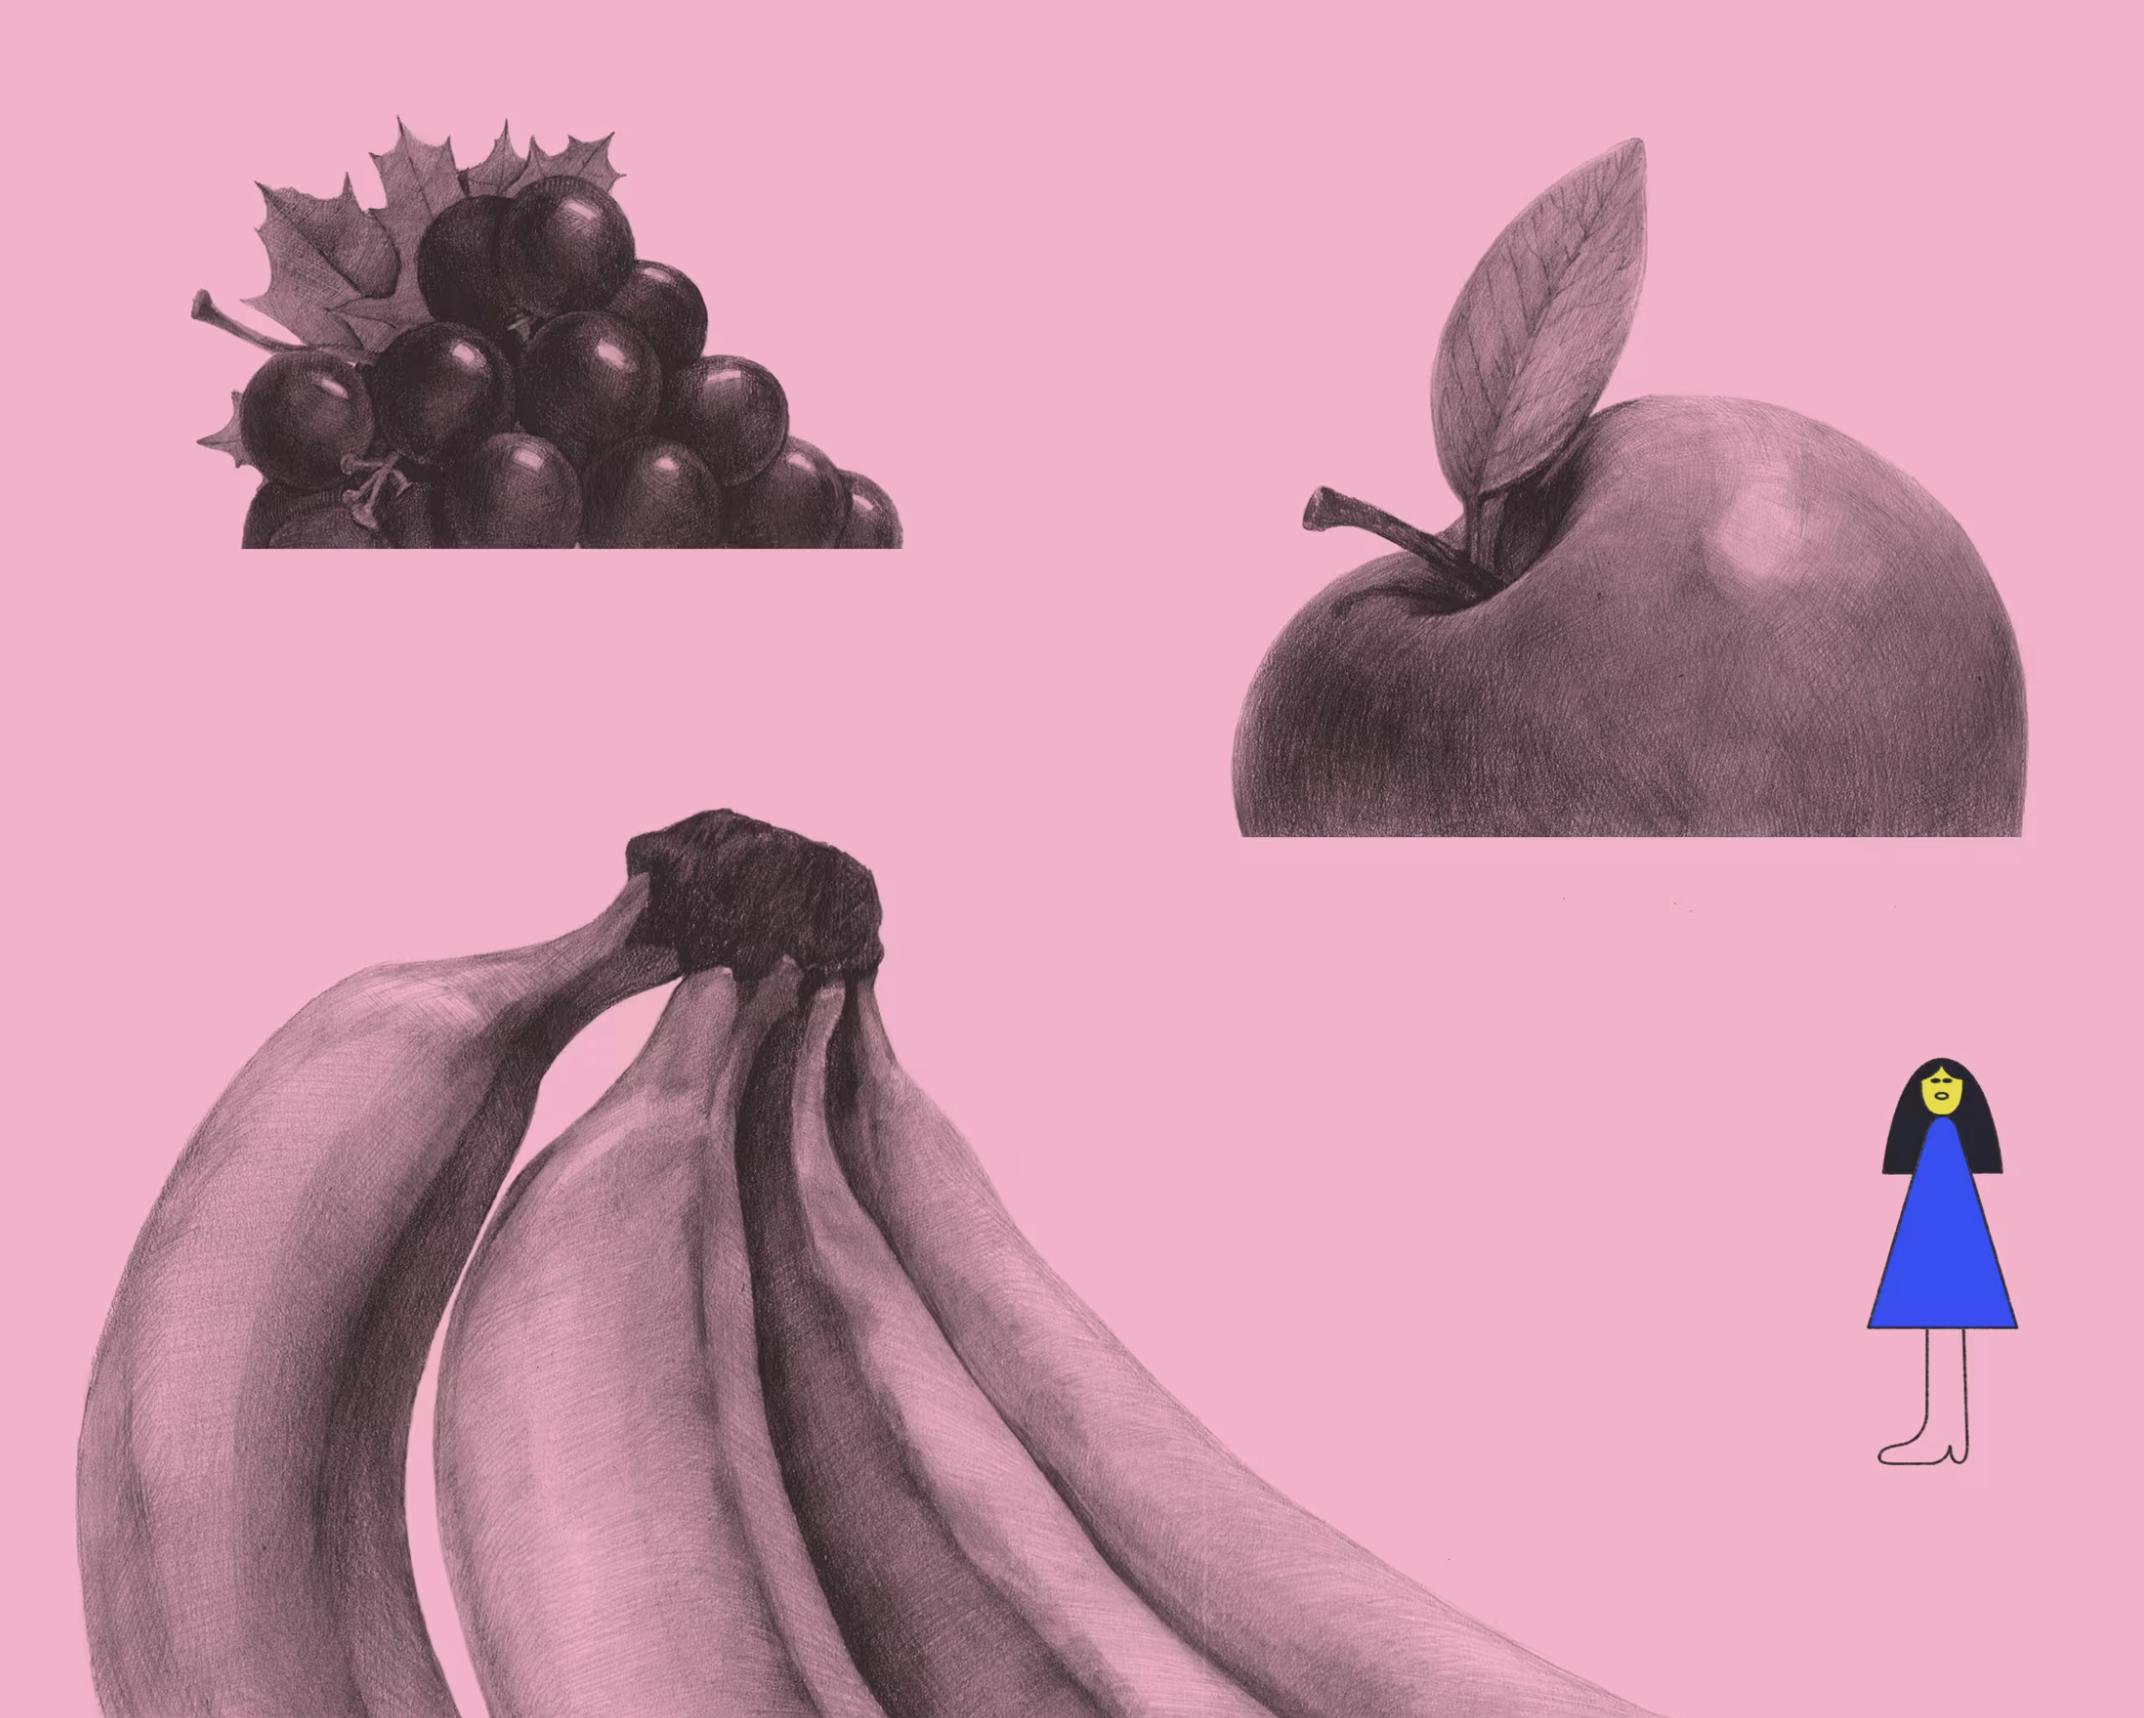 From Nicolas Menard's Wednesdays with Goddard (2016). A pink background, in the top left corner is a life drawing of grapes in pencil, the top left an apple, and bottom left bananas. Then in the bottom right is a more vector illustration of a feminine figure with yellow skin, straight black hair, a blue dress, and a contour drawing of a boot as their legs